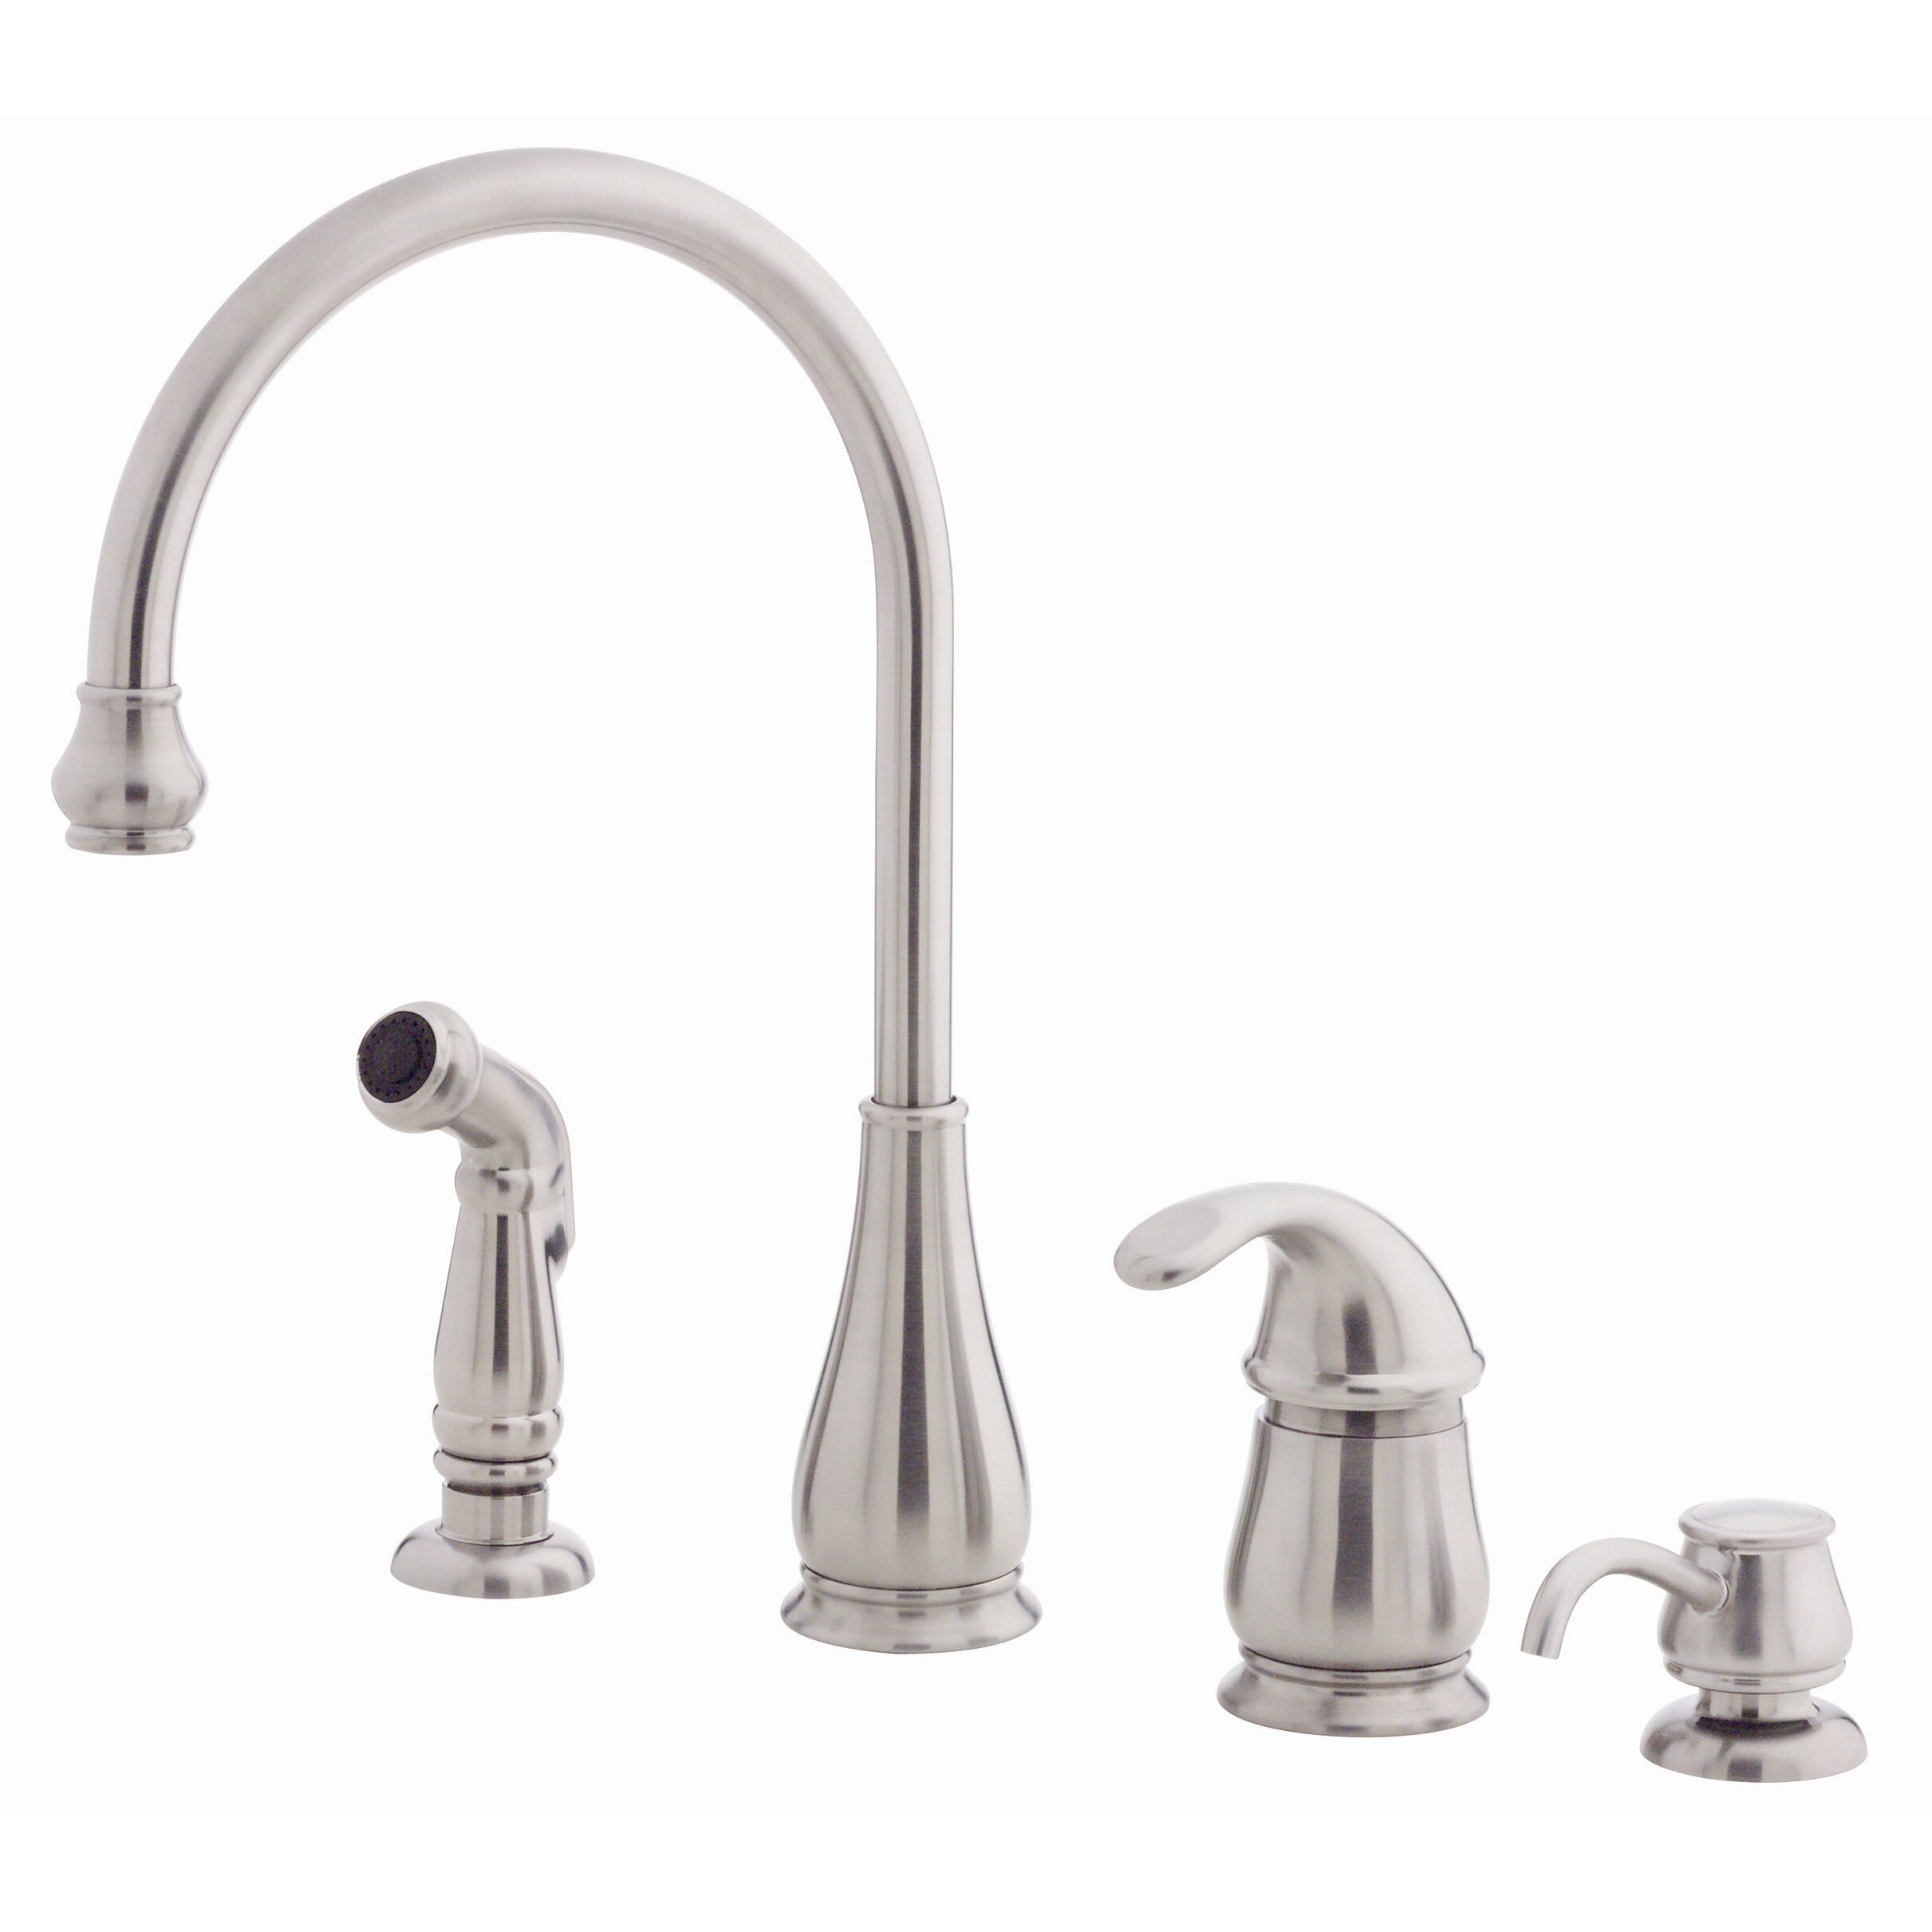 Treviso Single Handle Deck Mounted Kitchen Faucet with Soap Lotion